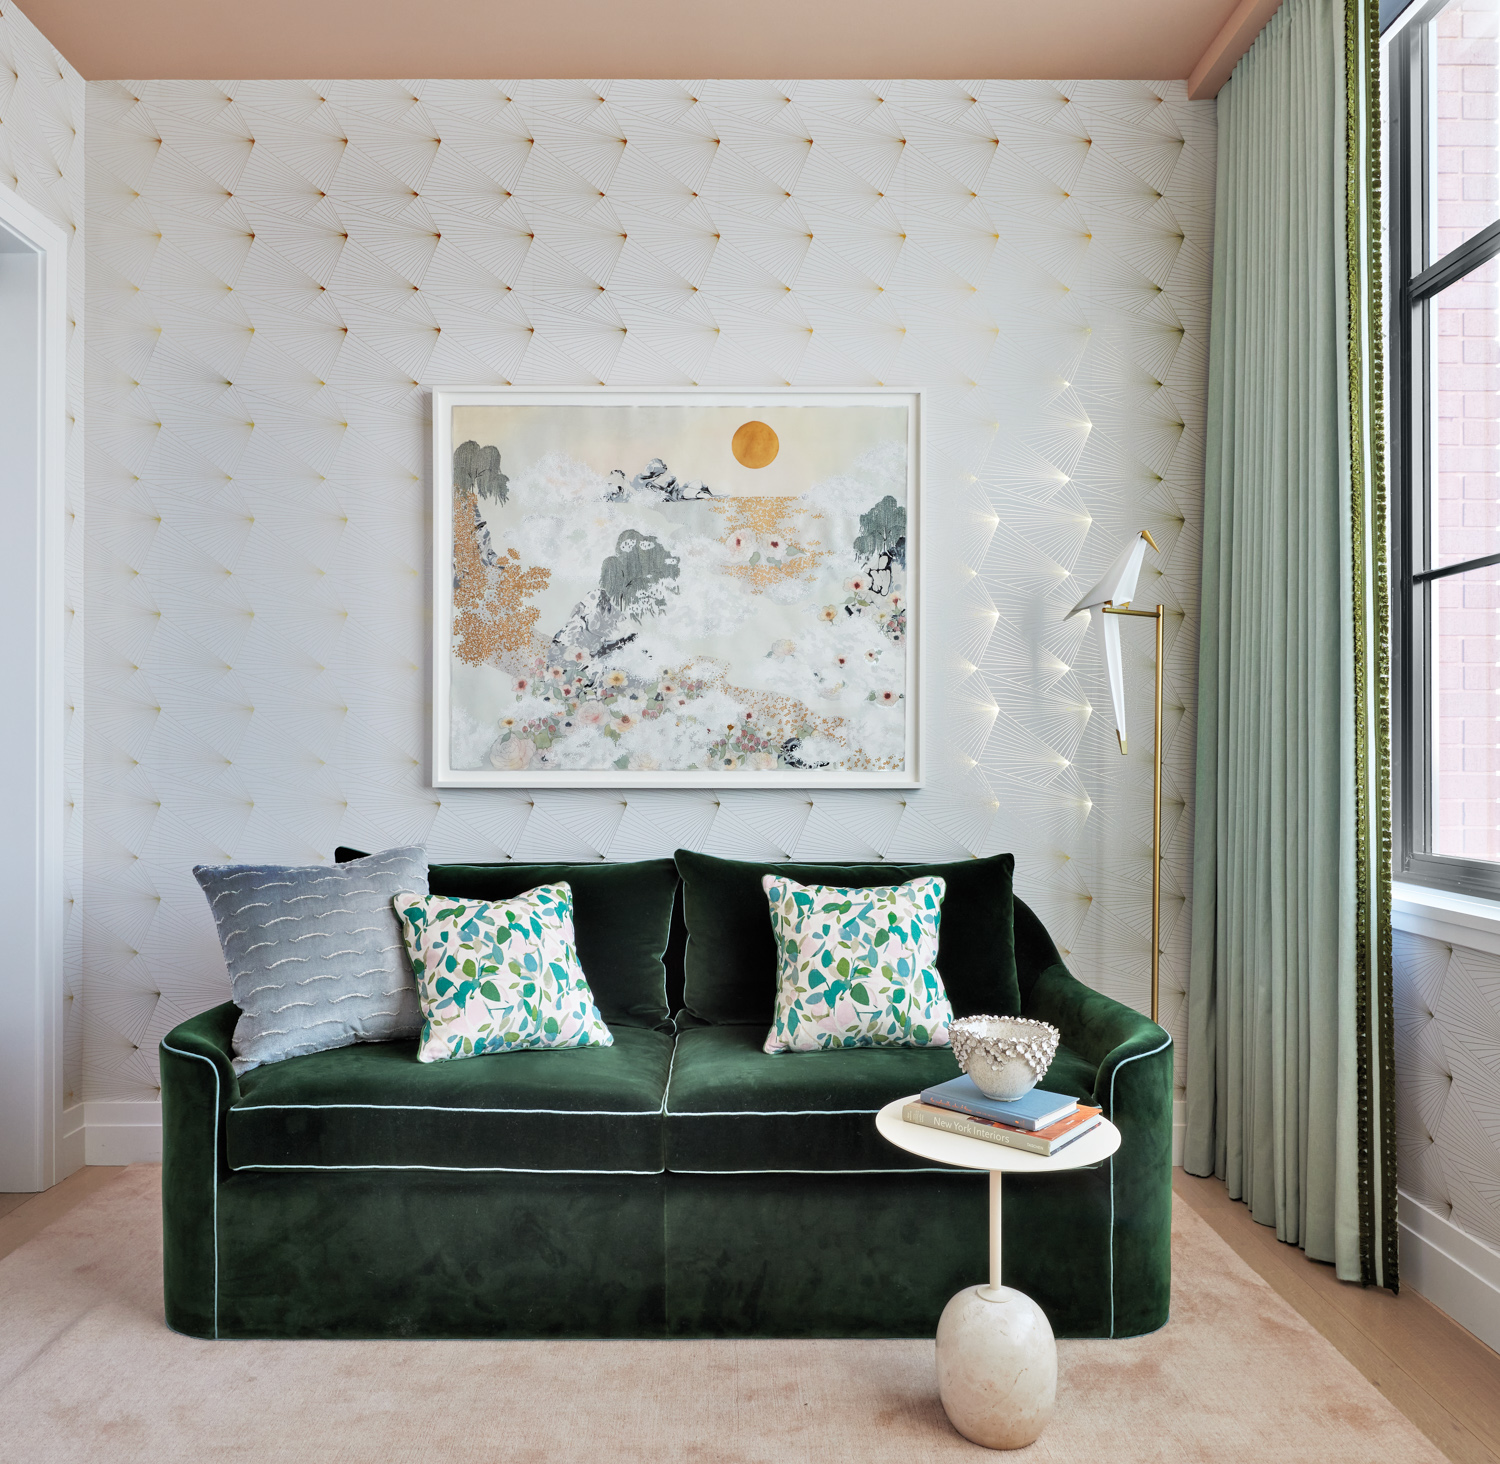 Room with a green velvet couch, a pink rug and white-and-gold foil wallpaper.